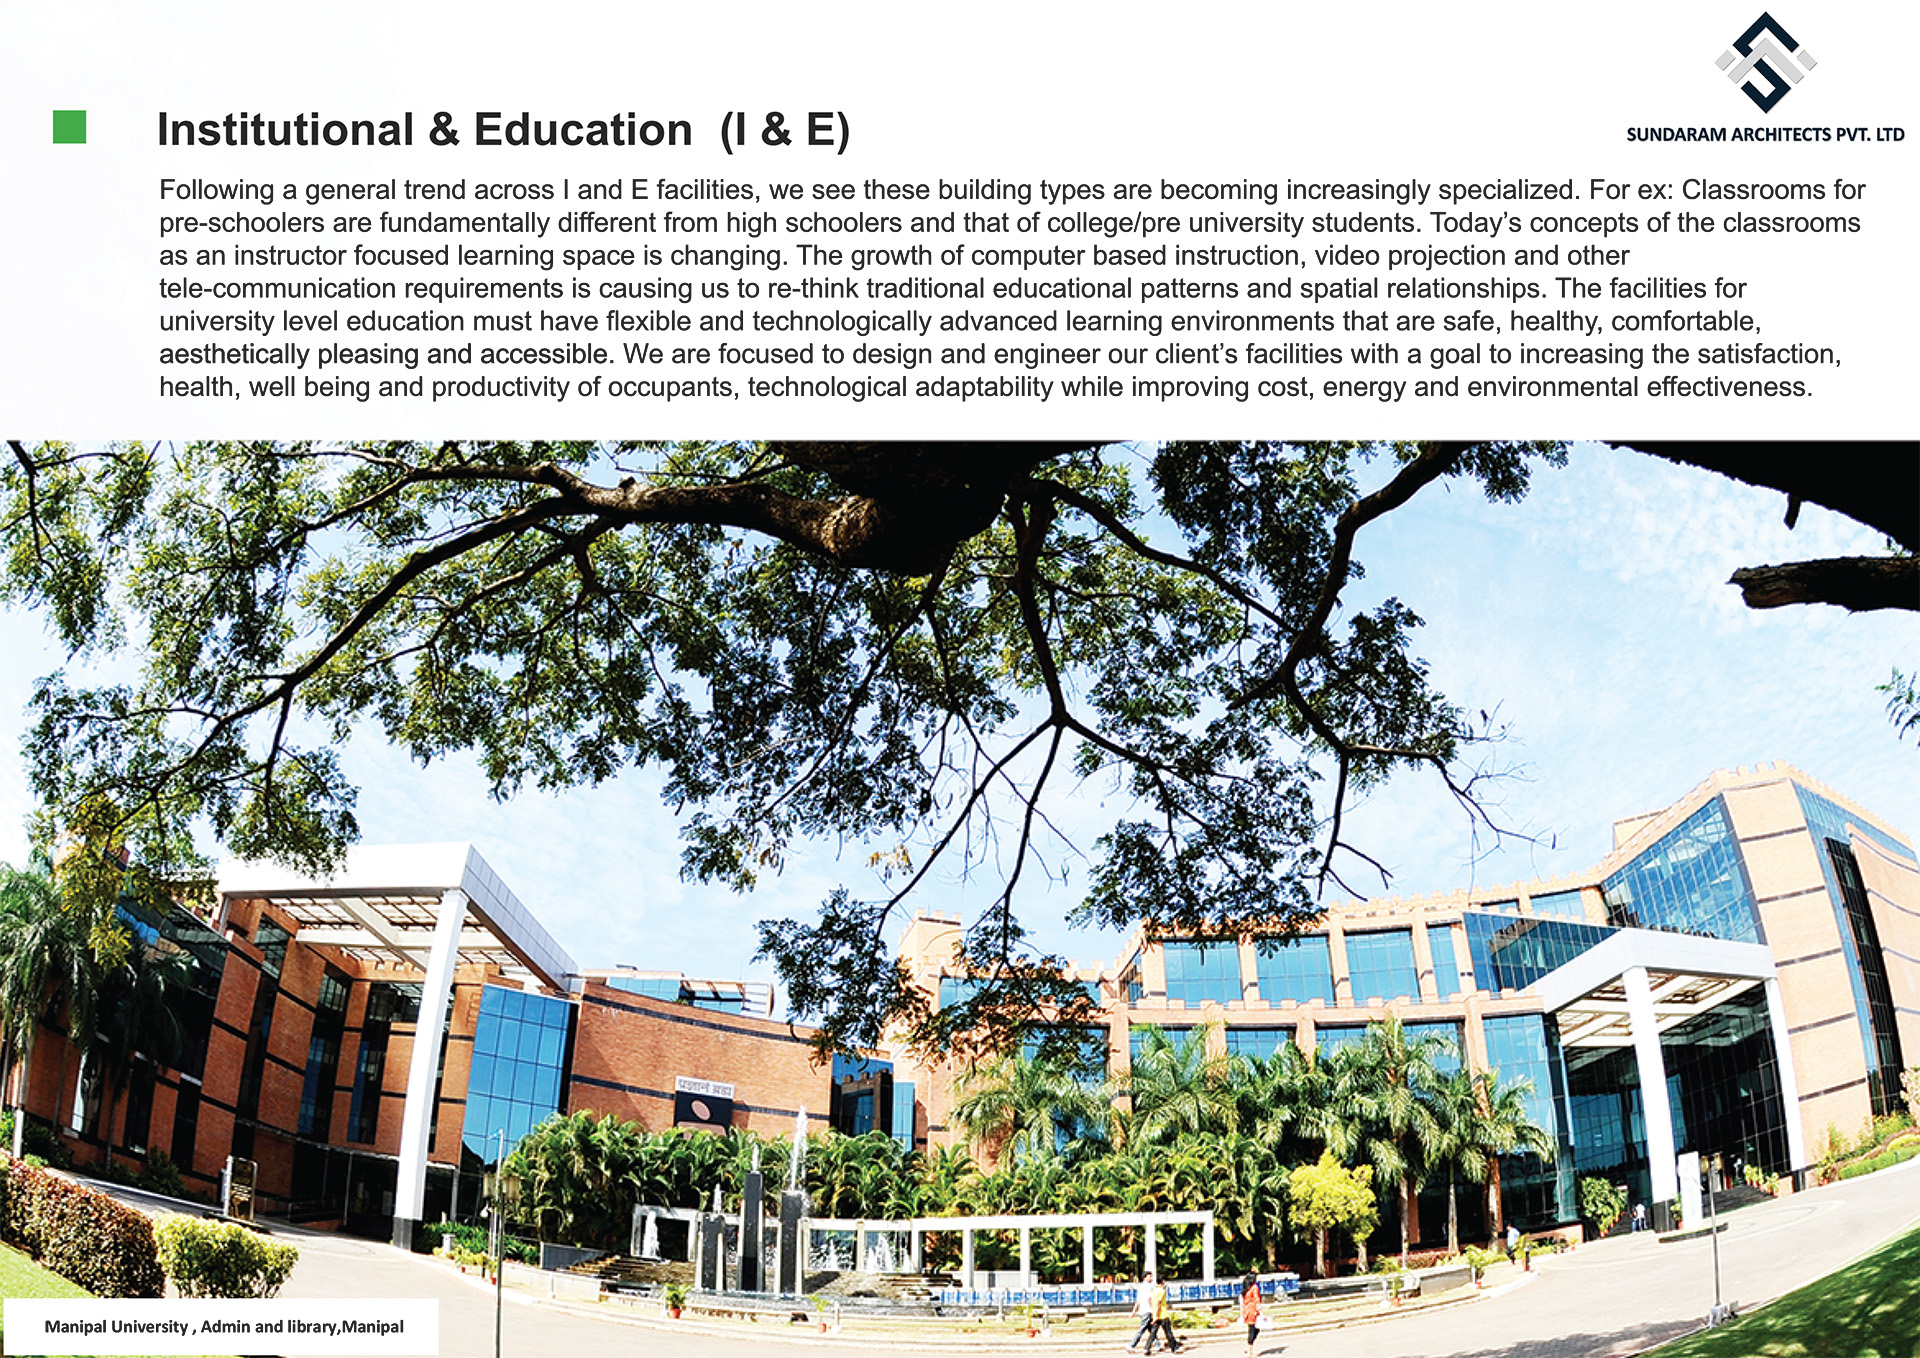 Manipal University, Admin & Library, Manipal - Institutional & Education Design - Best Structural Design in India,Bangalore